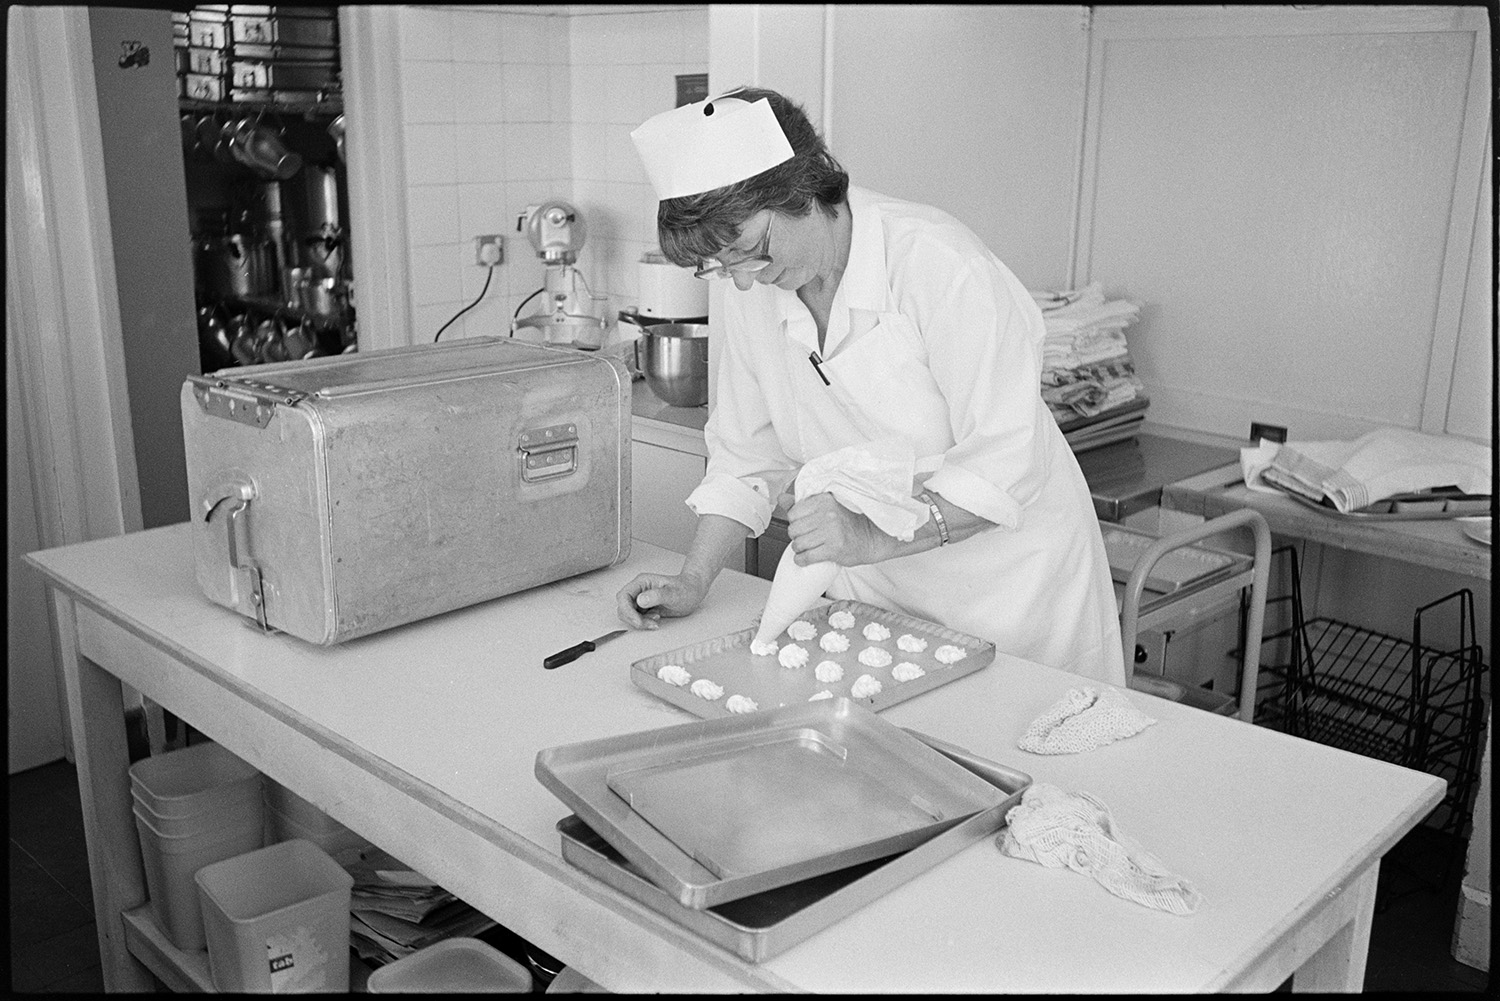 A day in a primary school, cook making cakes, games in the playground, teaching.
[A cook making cakes in the canteen at Chulmleigh Primary School. She is piping the mixture onto a baking tray. Trolleys and other cooking equipment is visible in the background.]